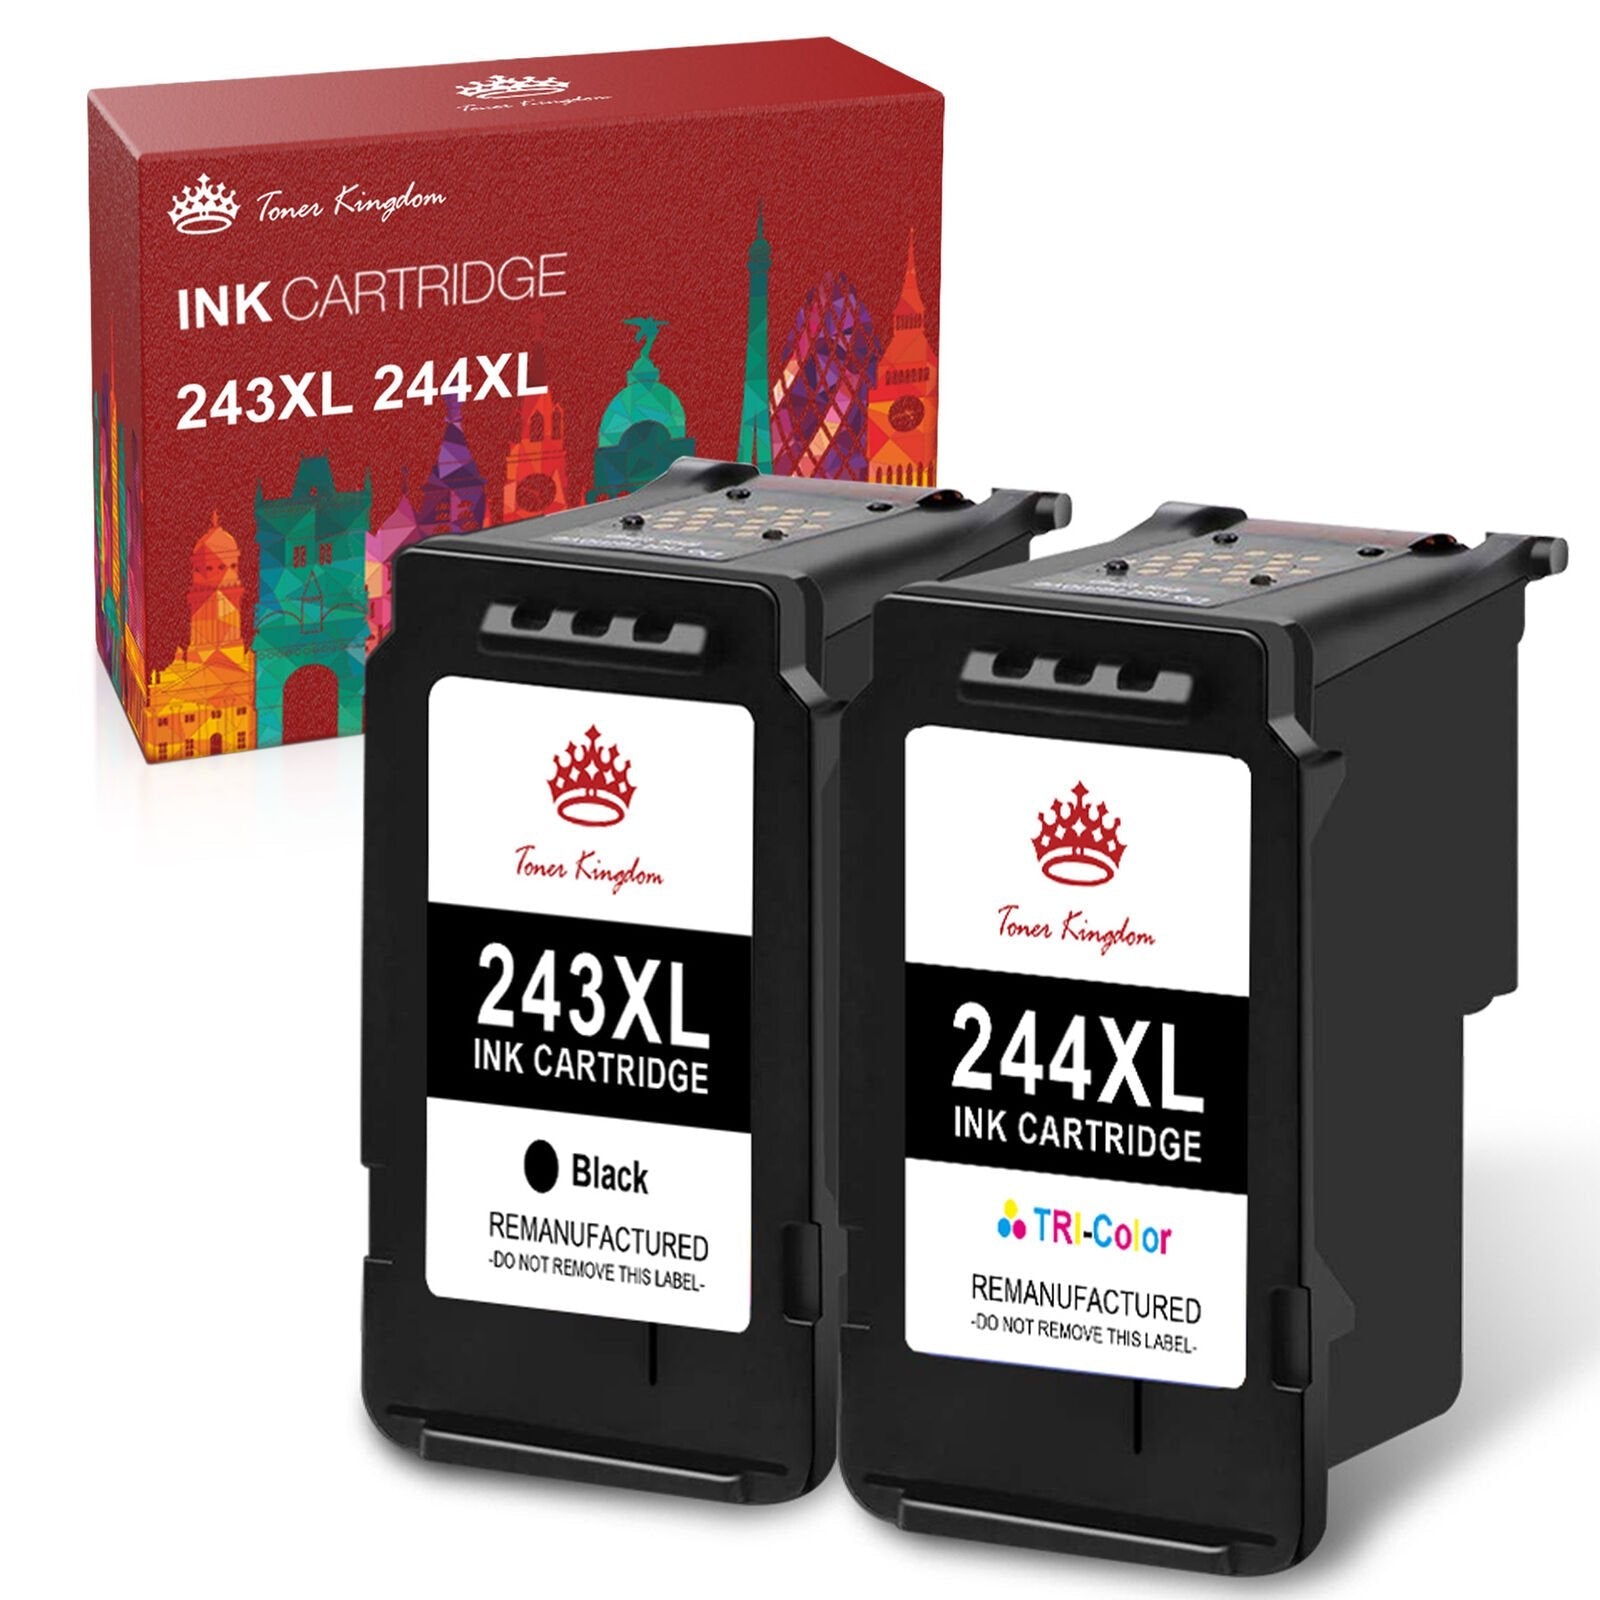 Electronics > Print, Copy, Scan & Fax > Printer, Copier & Fax Machine Accessories > Printer Consumables > Toner & Inkjet Cartridges>brother LC3013-PG-243 CL-244 Replacement for Canon Ink cartridges-2 pack (1Black/1Tri-Color)